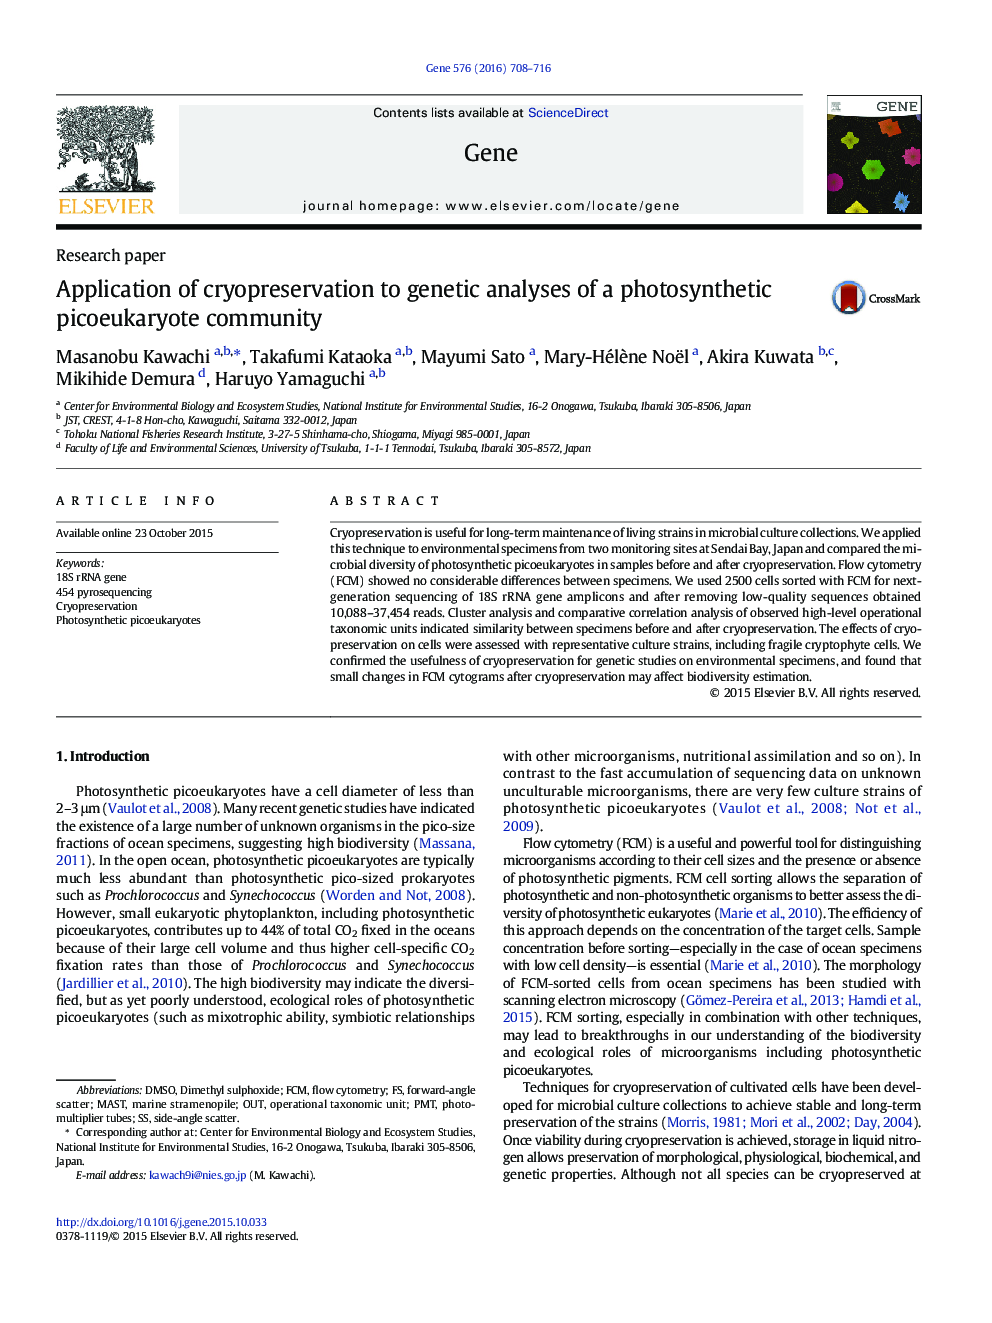 Application of cryopreservation to genetic analyses of a photosynthetic picoeukaryote community